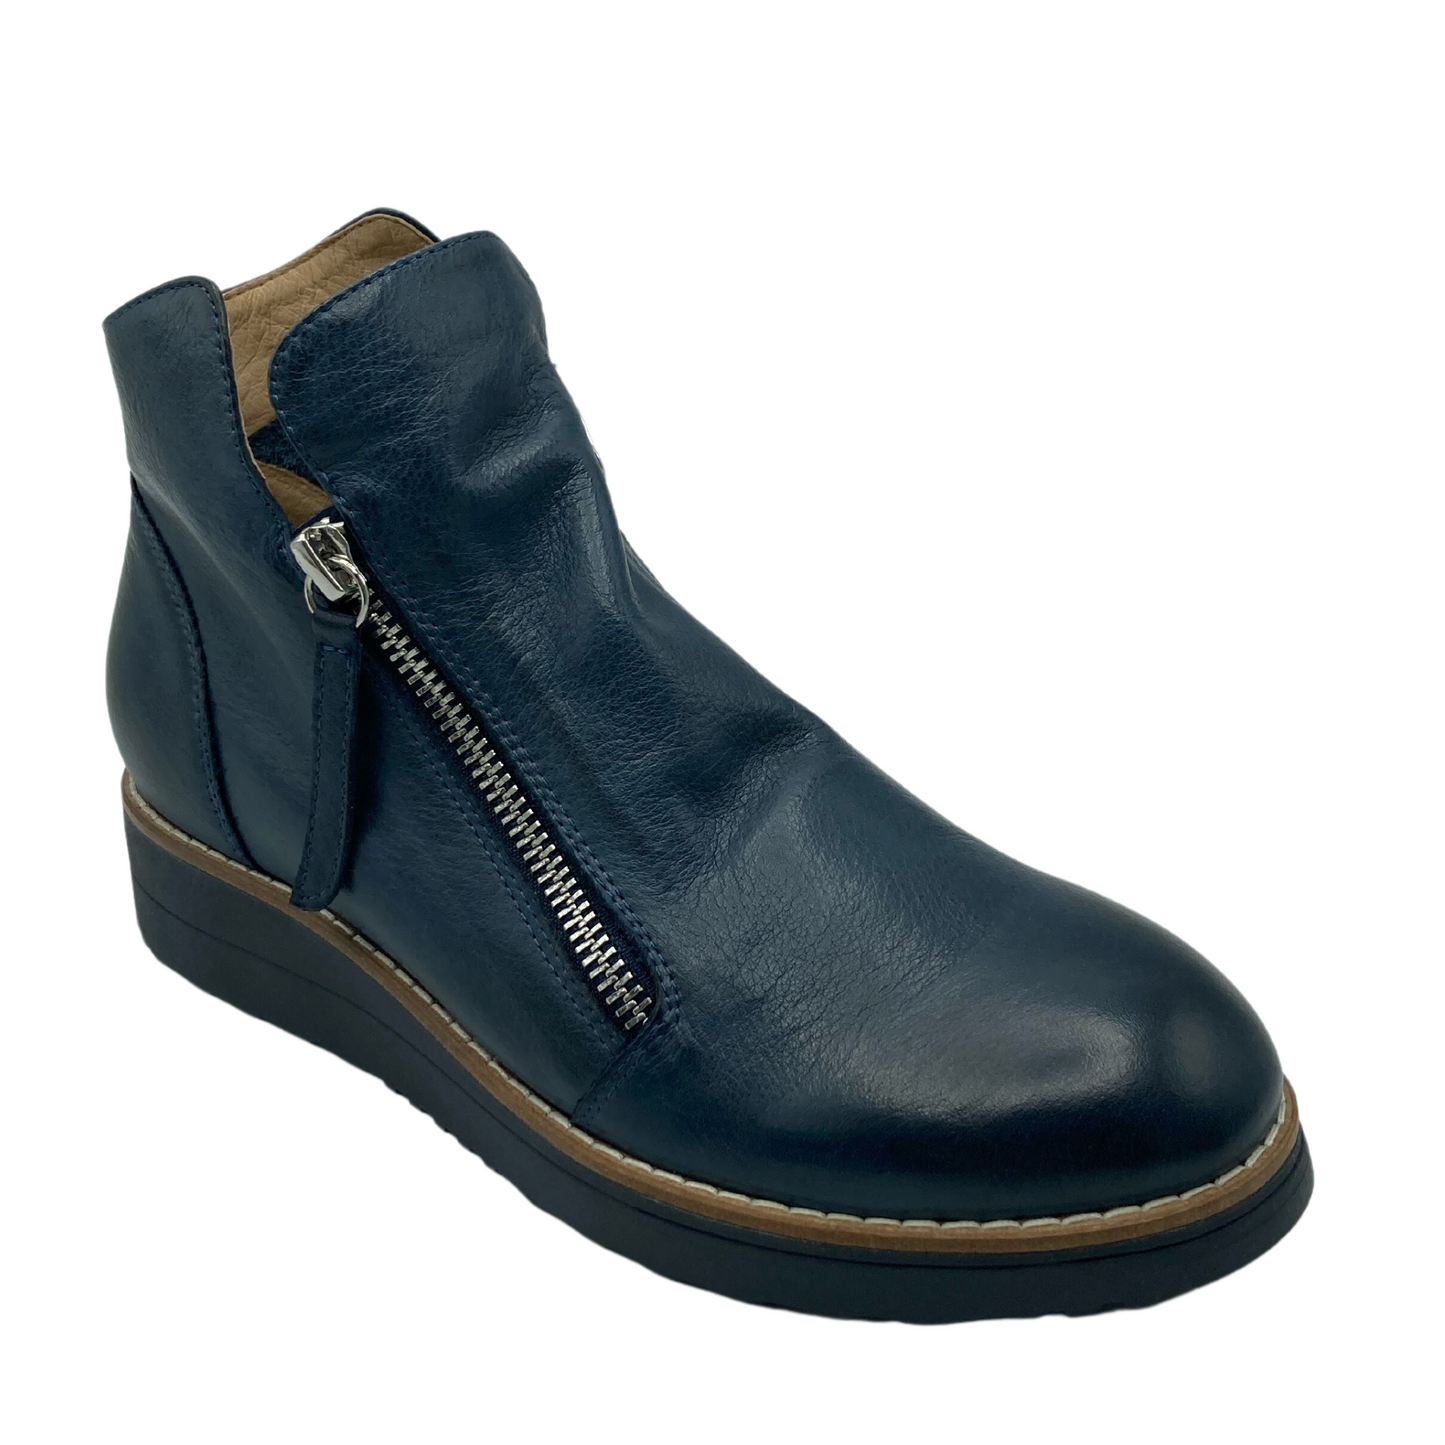 45 degree angled view of a short navy coloured leather boot with silver zipper and black rubber sole